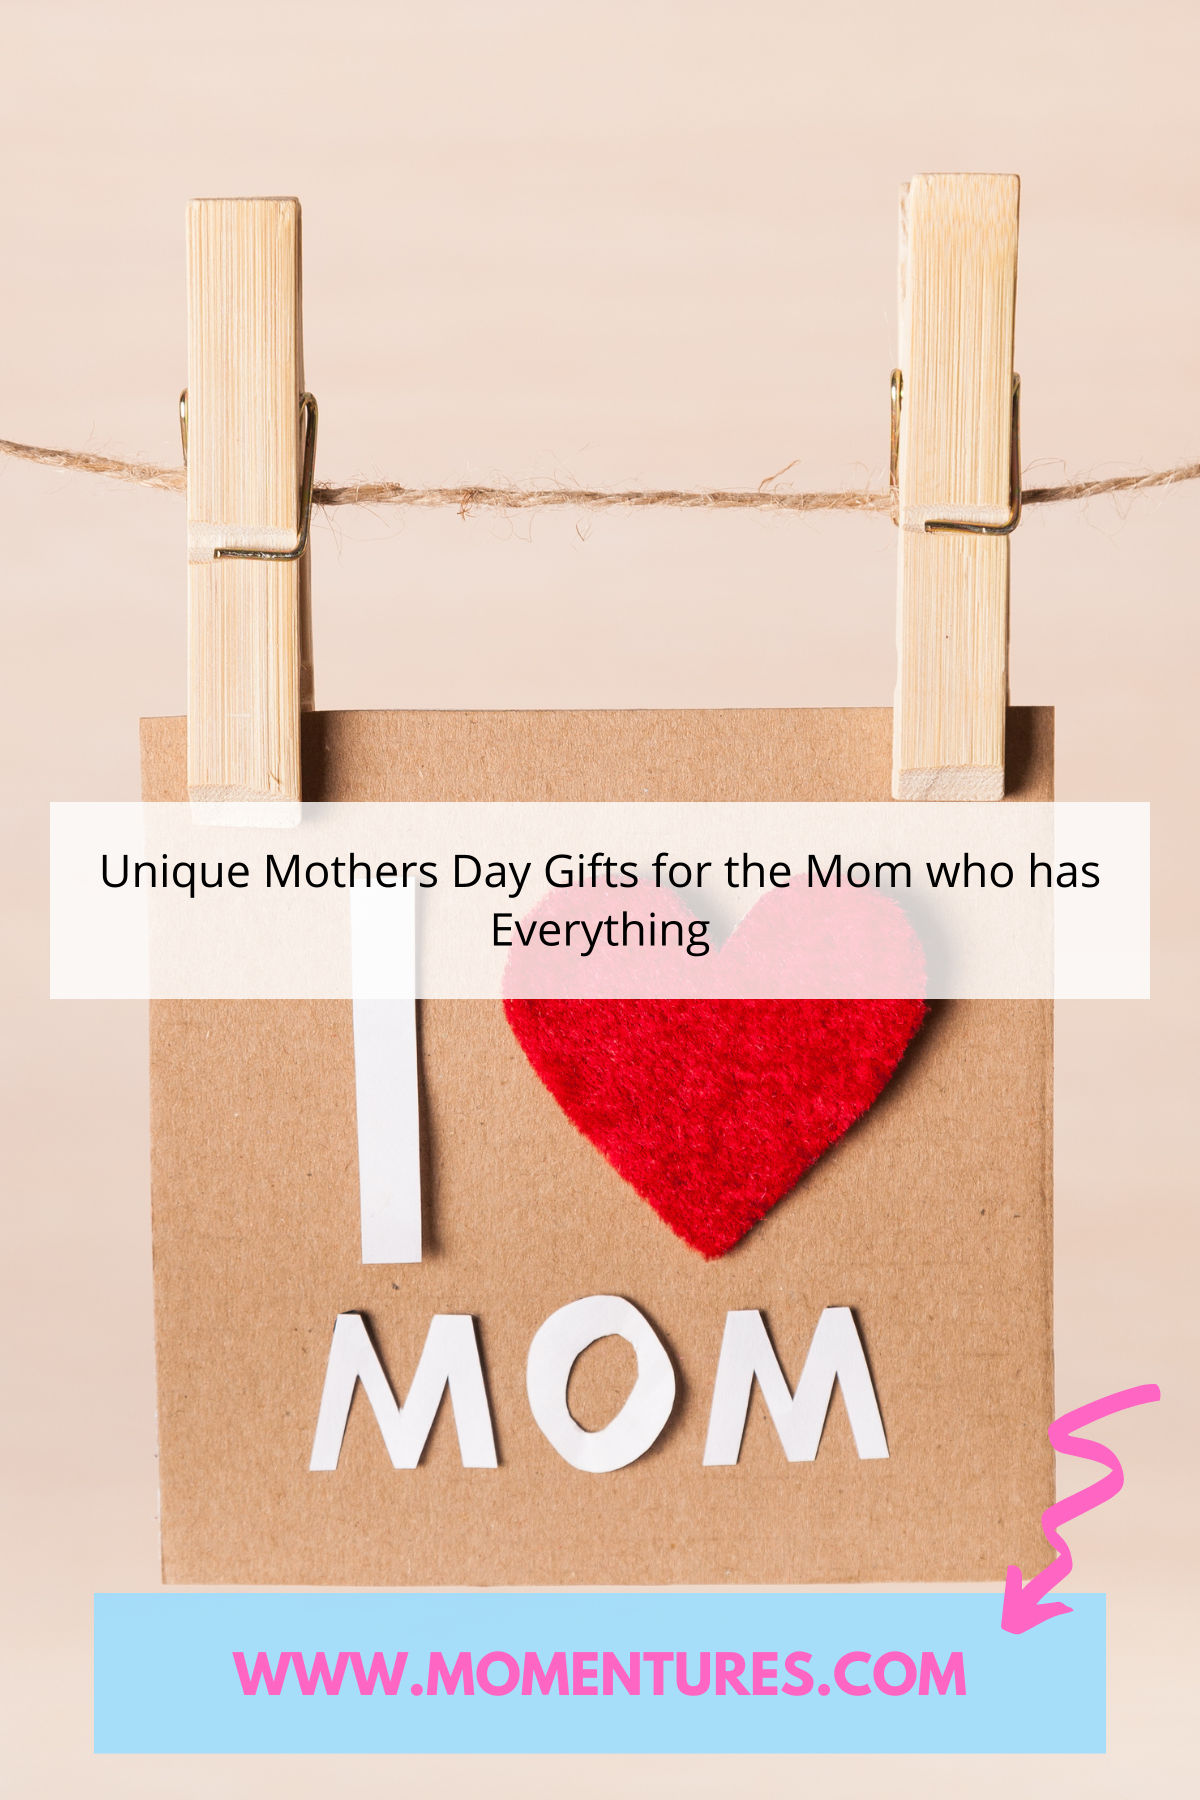 Unique Mothers Day Gifts for the Mom who has Everything